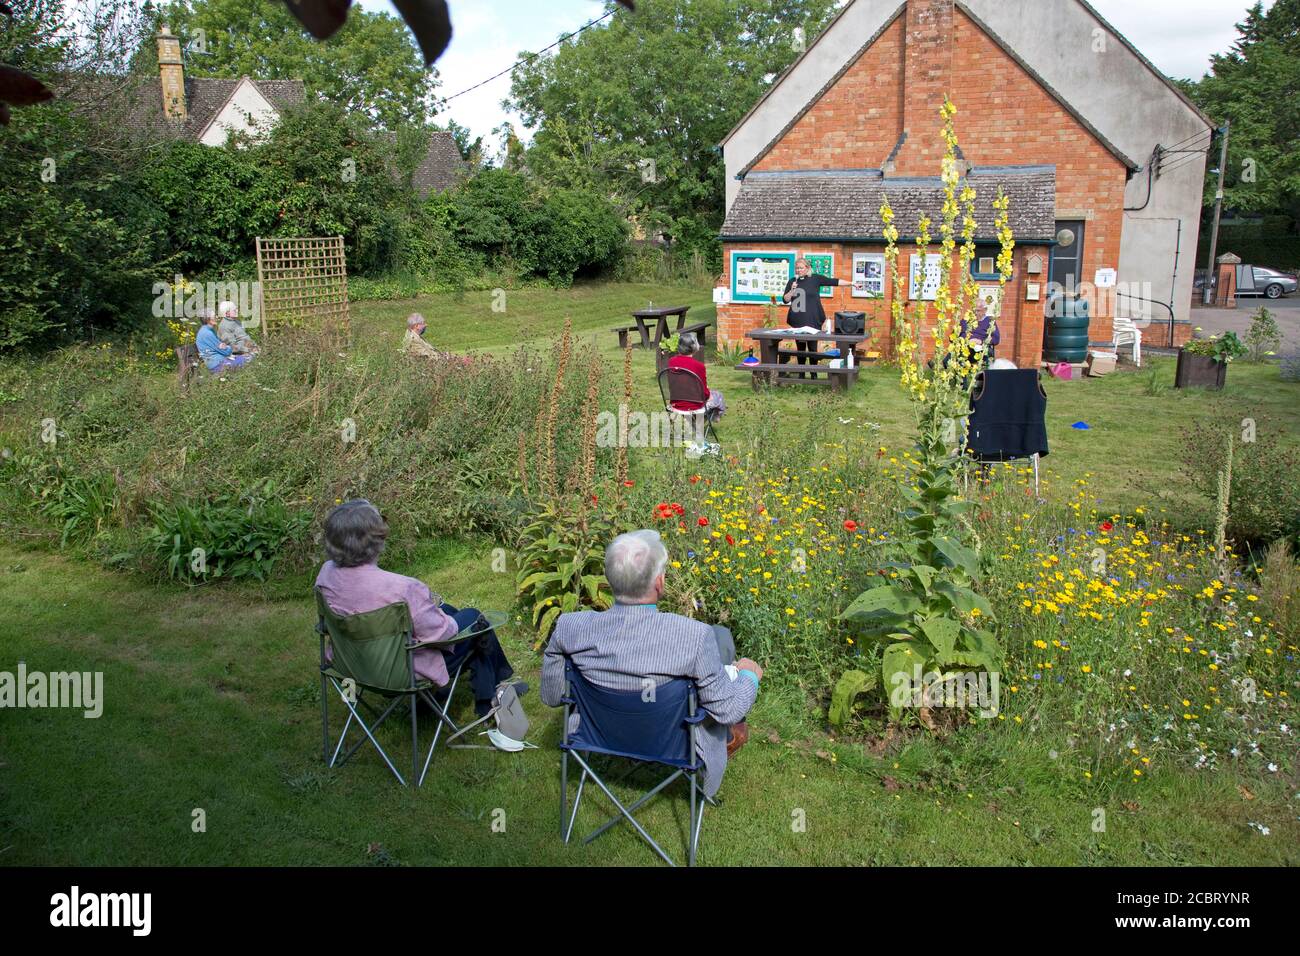 Methodist church service taking place in church garden during coronavirus cris with social distancing observed Mickleton UK Stock Photo